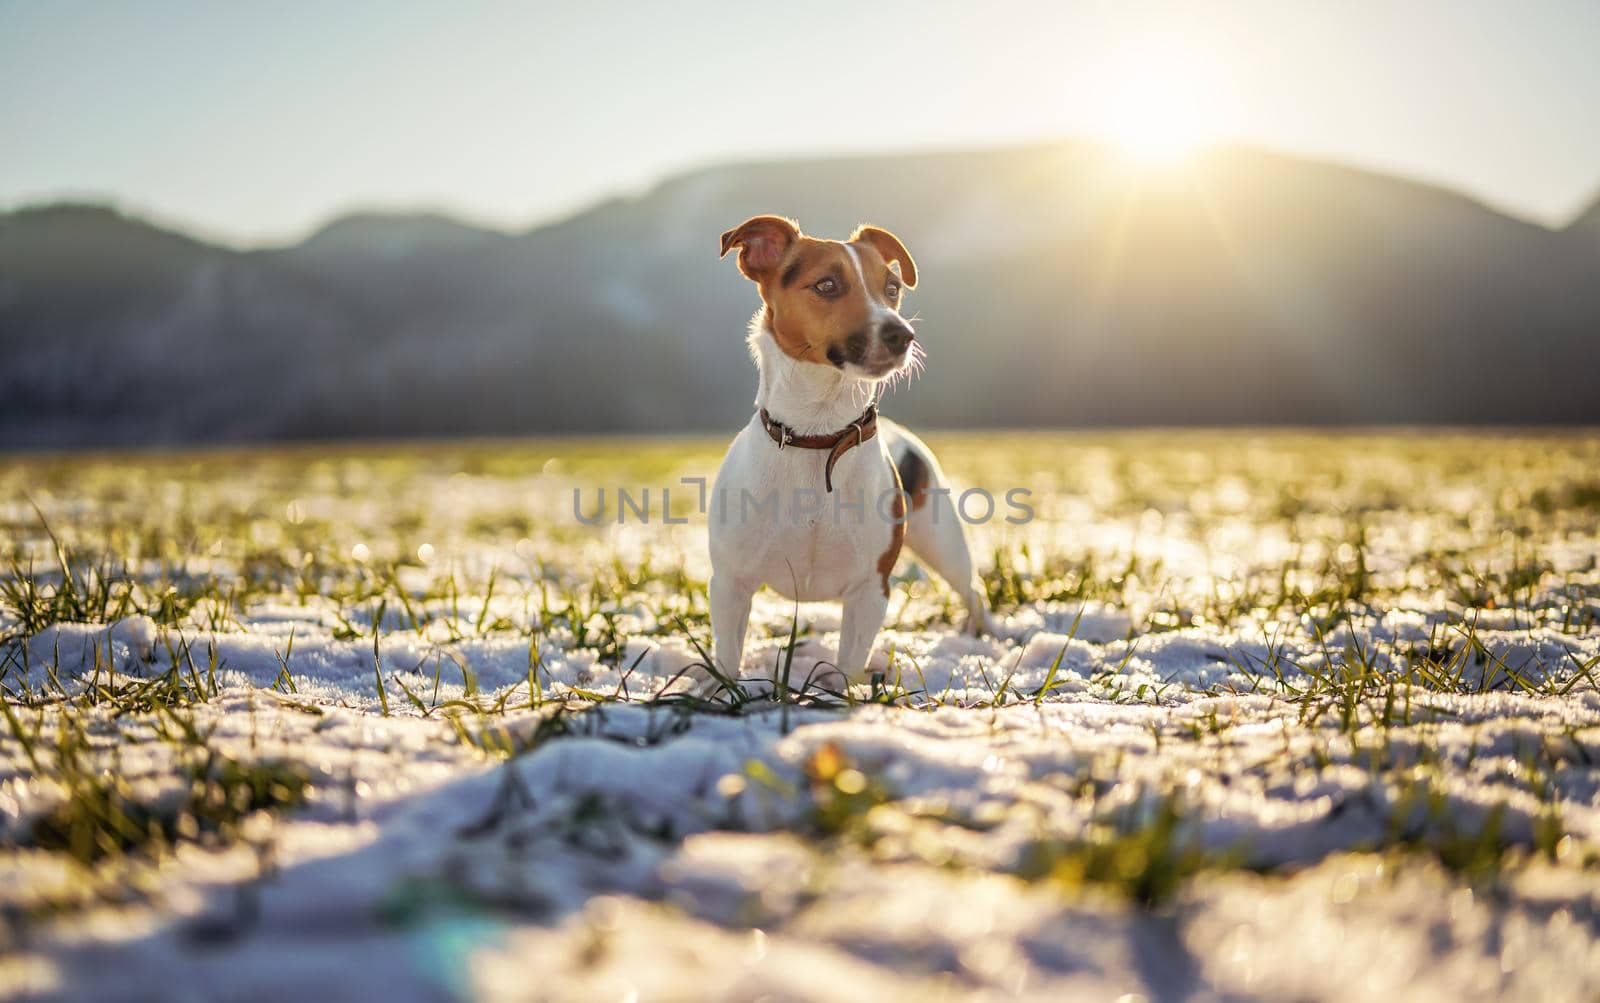 Small Jack Russell terrier stands on green grass meadow with patches of snow during freezing winter day, sun shines over hills behind her.